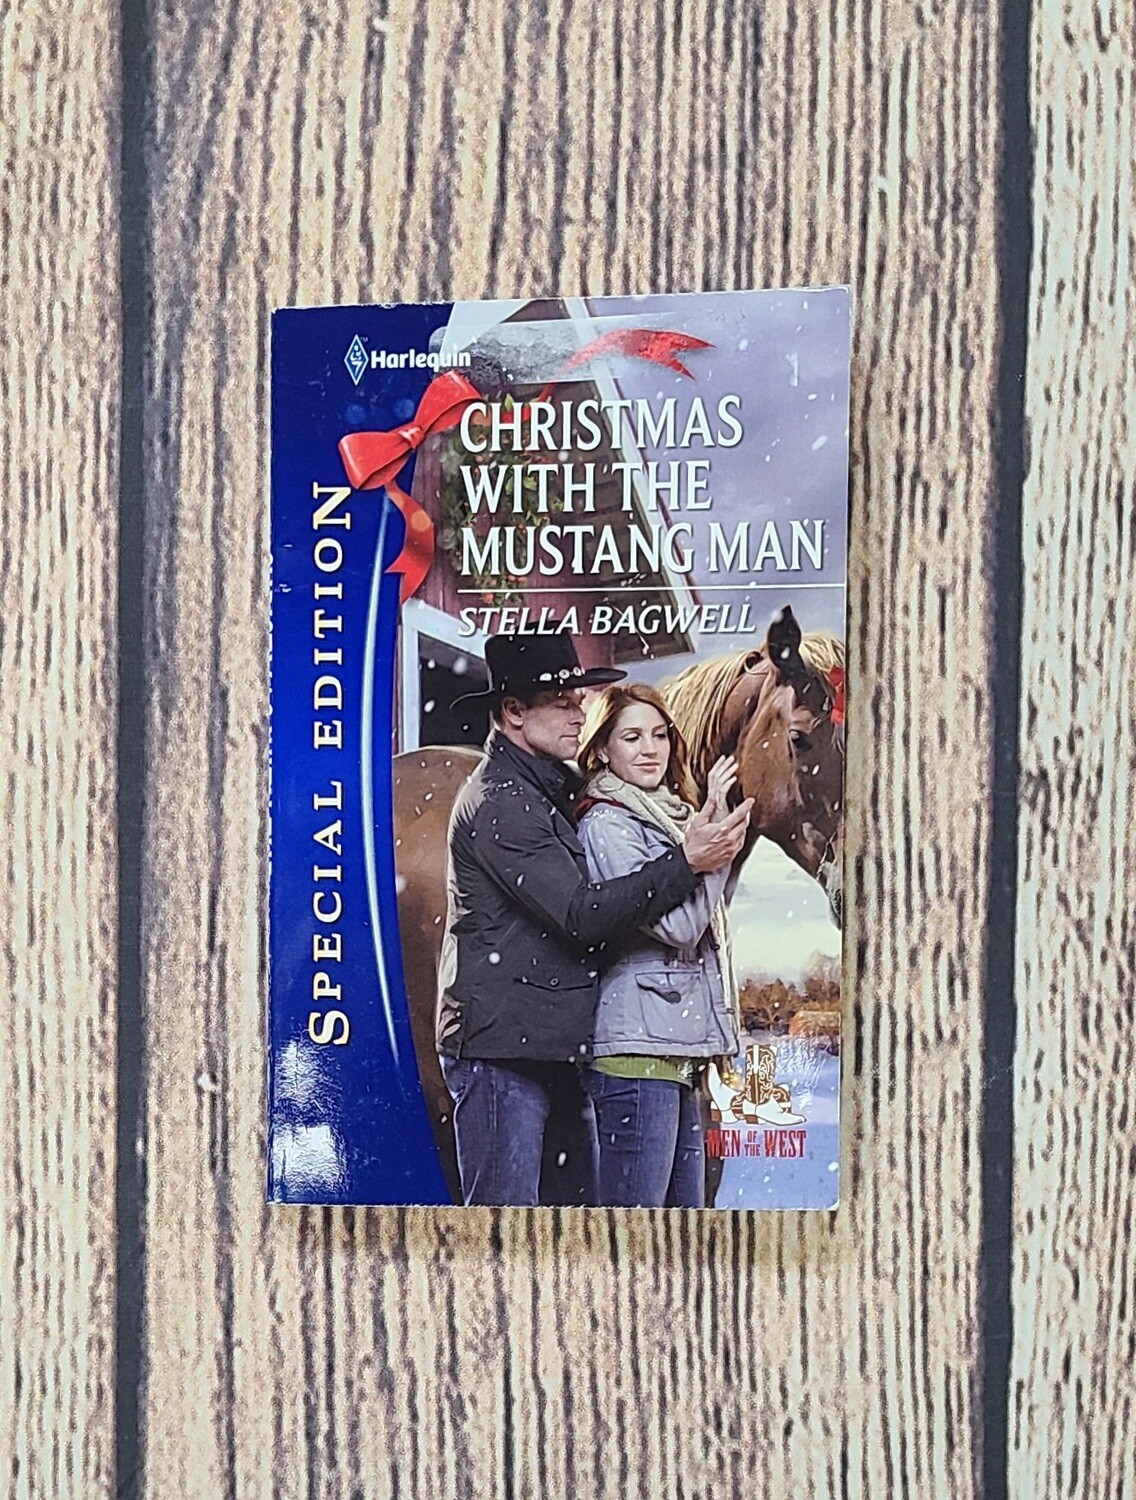 Christmas with the Mustang Man by Stella Bagwell